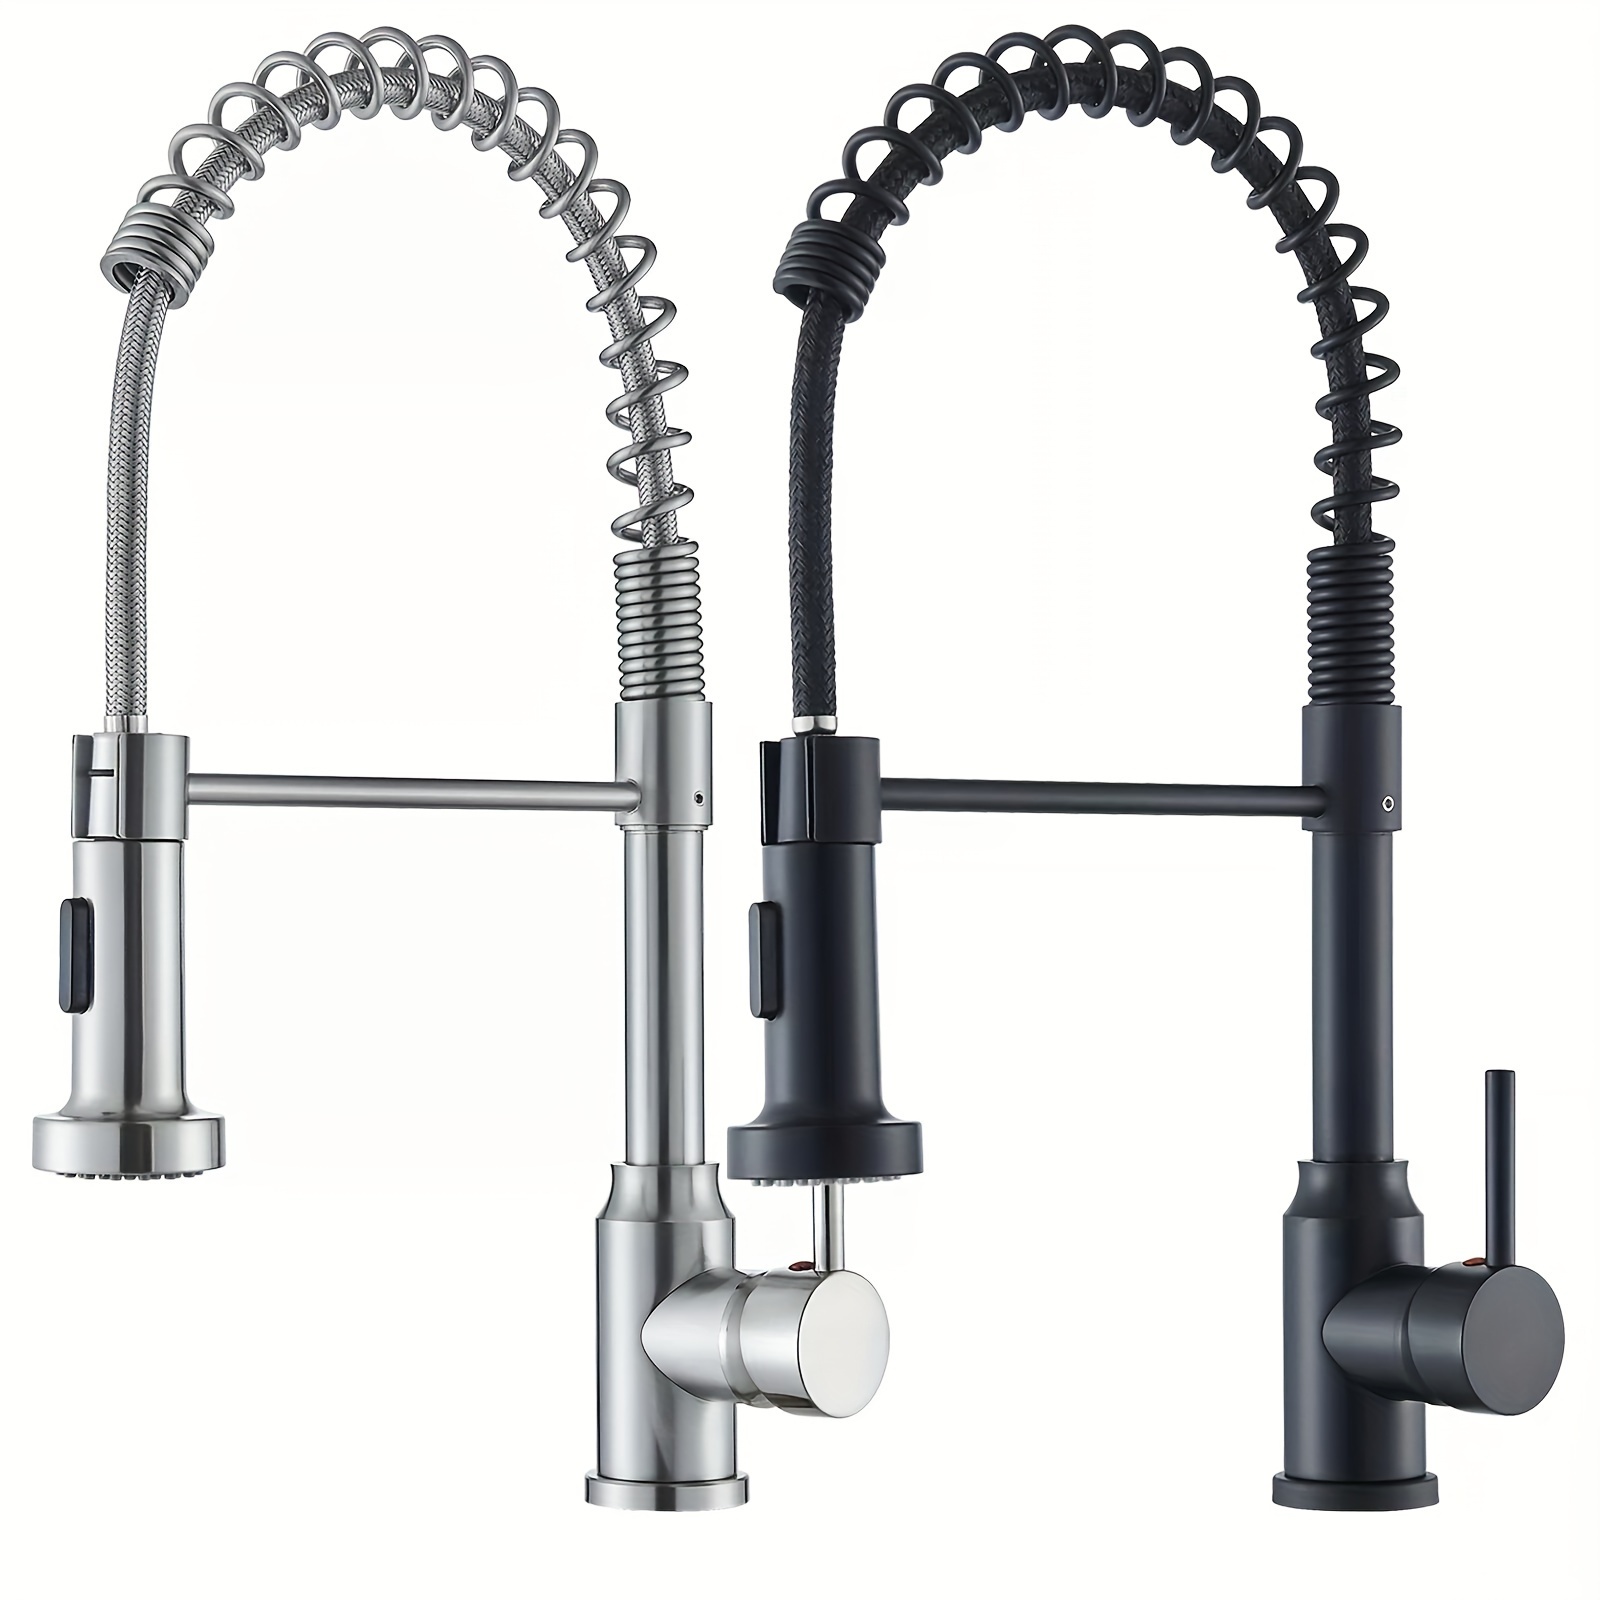 

Matte Black Kitchen Sink Faucet Spring Pull Down Sprayer Single Handle Mixer Tap, Pull Down Kitchen Sink Faucet With Single Hole Single Handle Swivel Mixer Faucet, Brushed Nickel